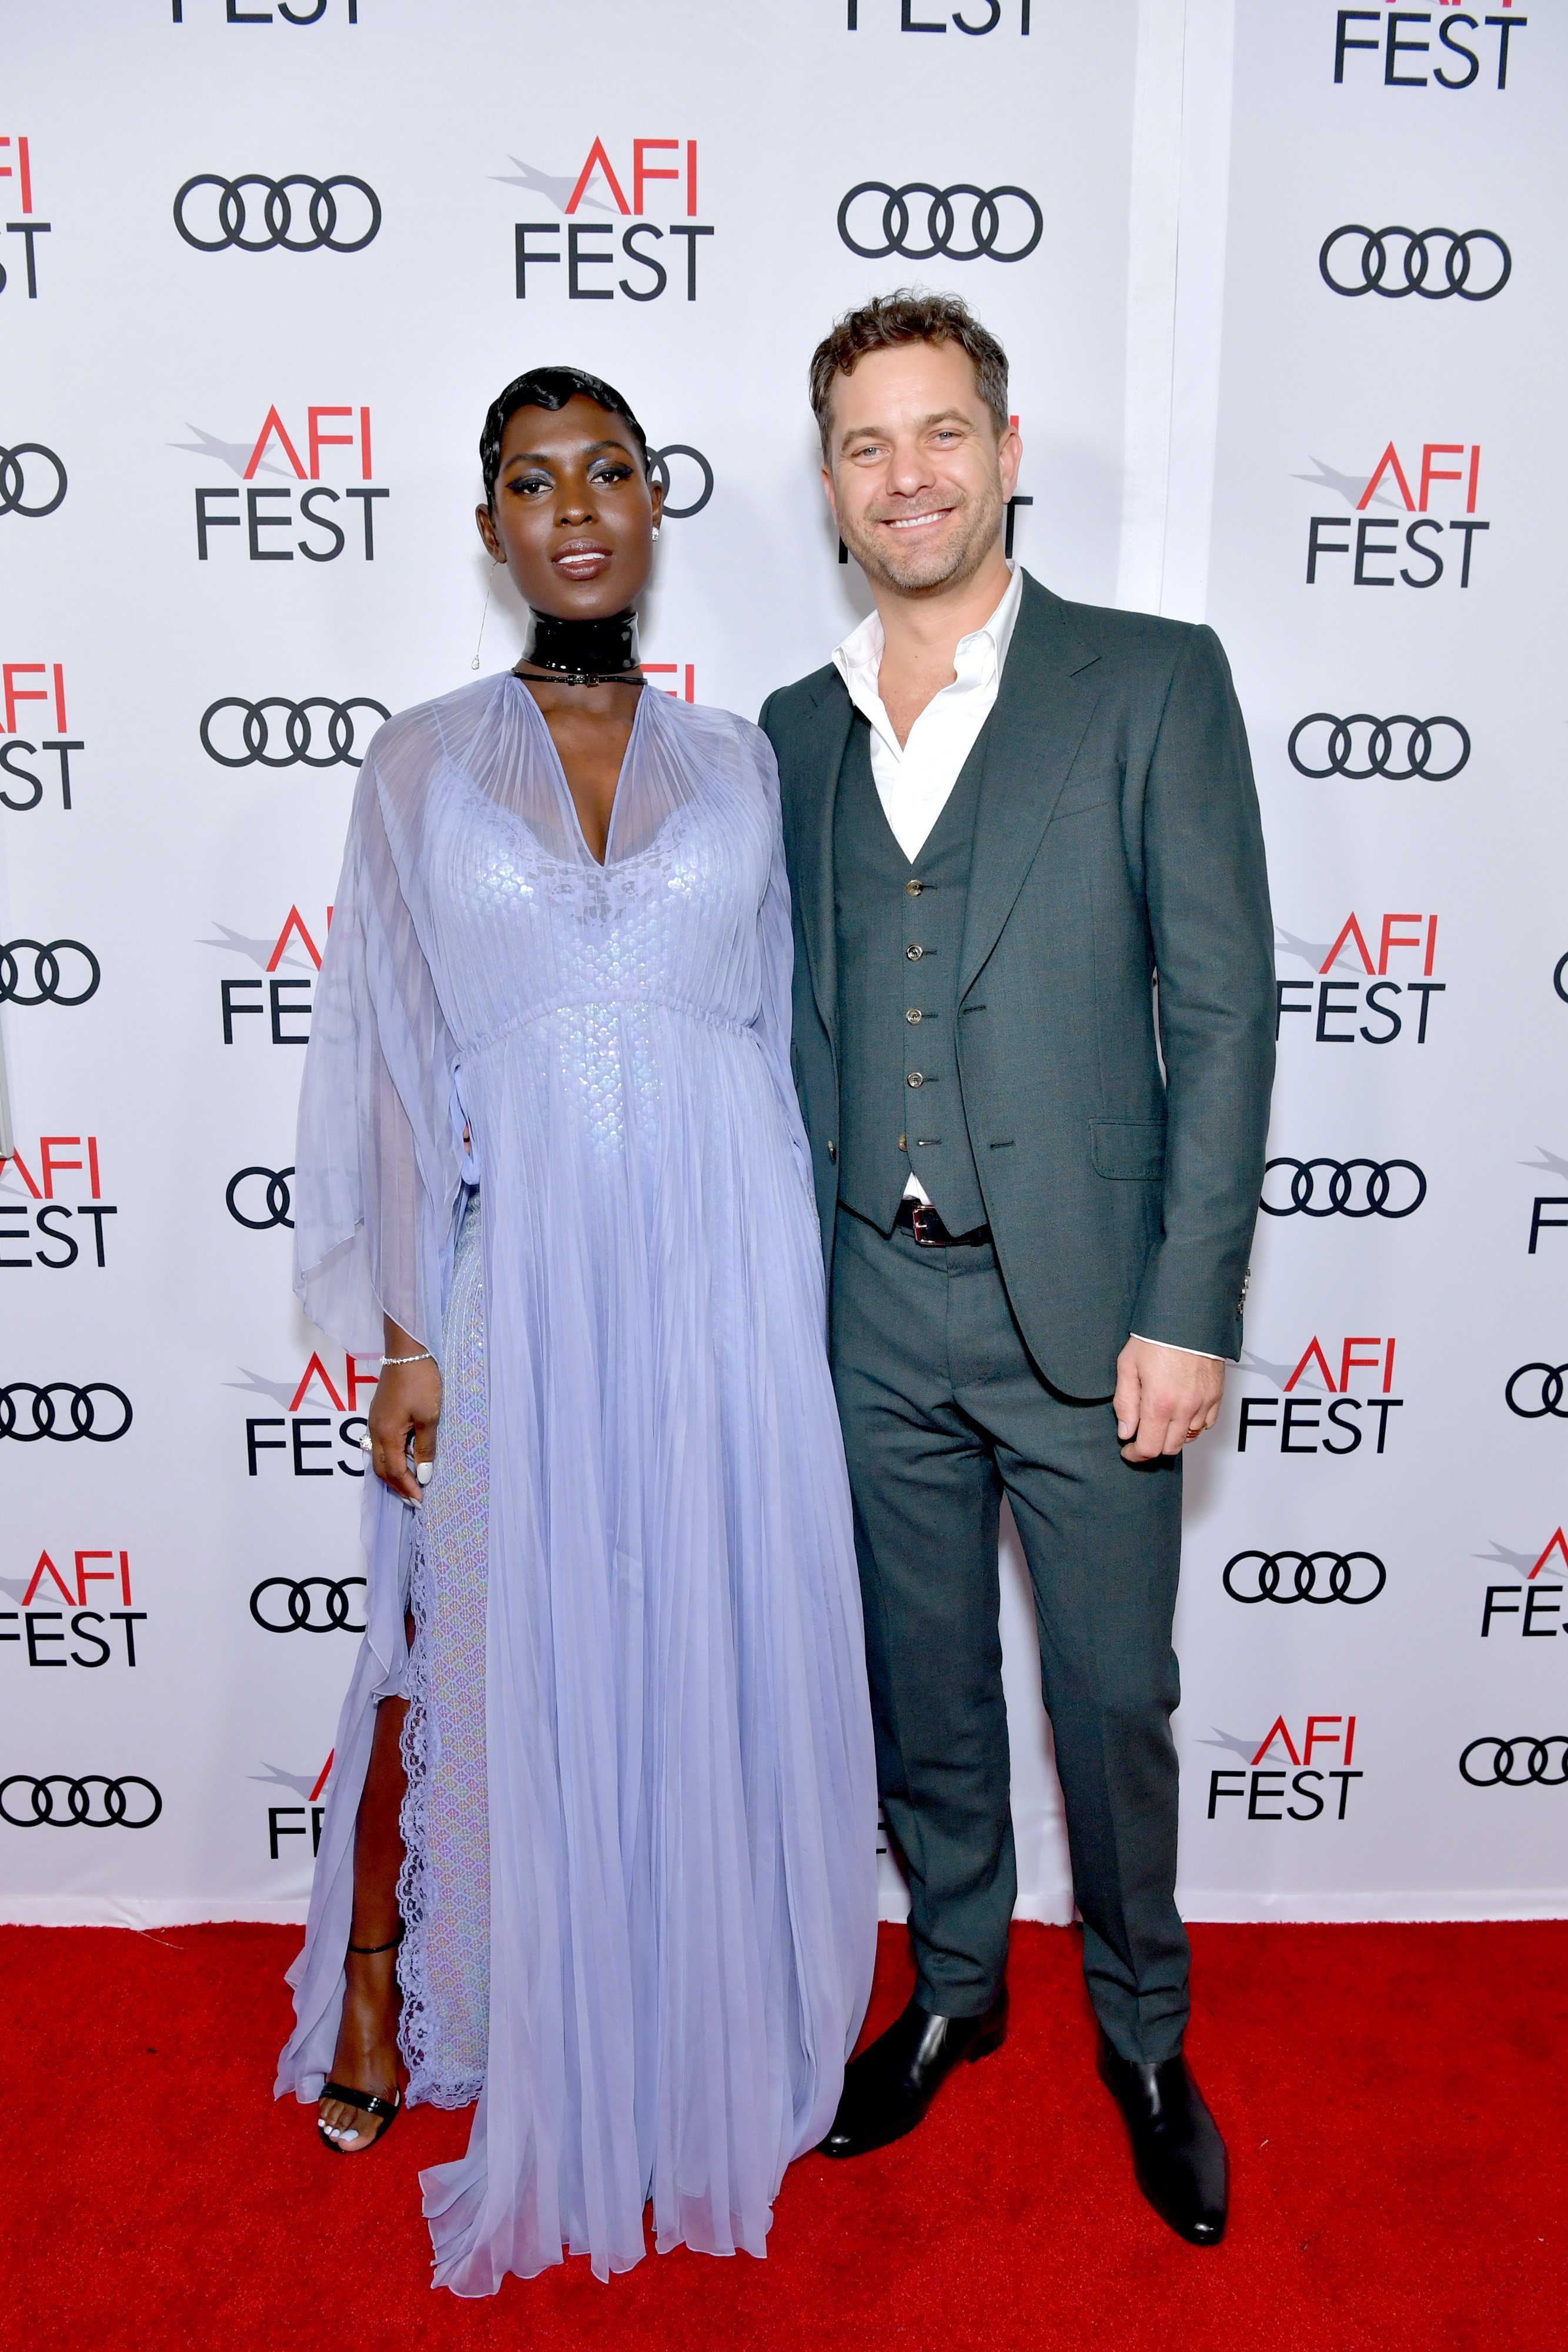 Joshua Jackson and Jodie Turner-Smith at the "Queen & Slim" Premiere at the TCL Chinese Theatre in Hollywood, California | Photo: Emma McIntyre/Getty Images